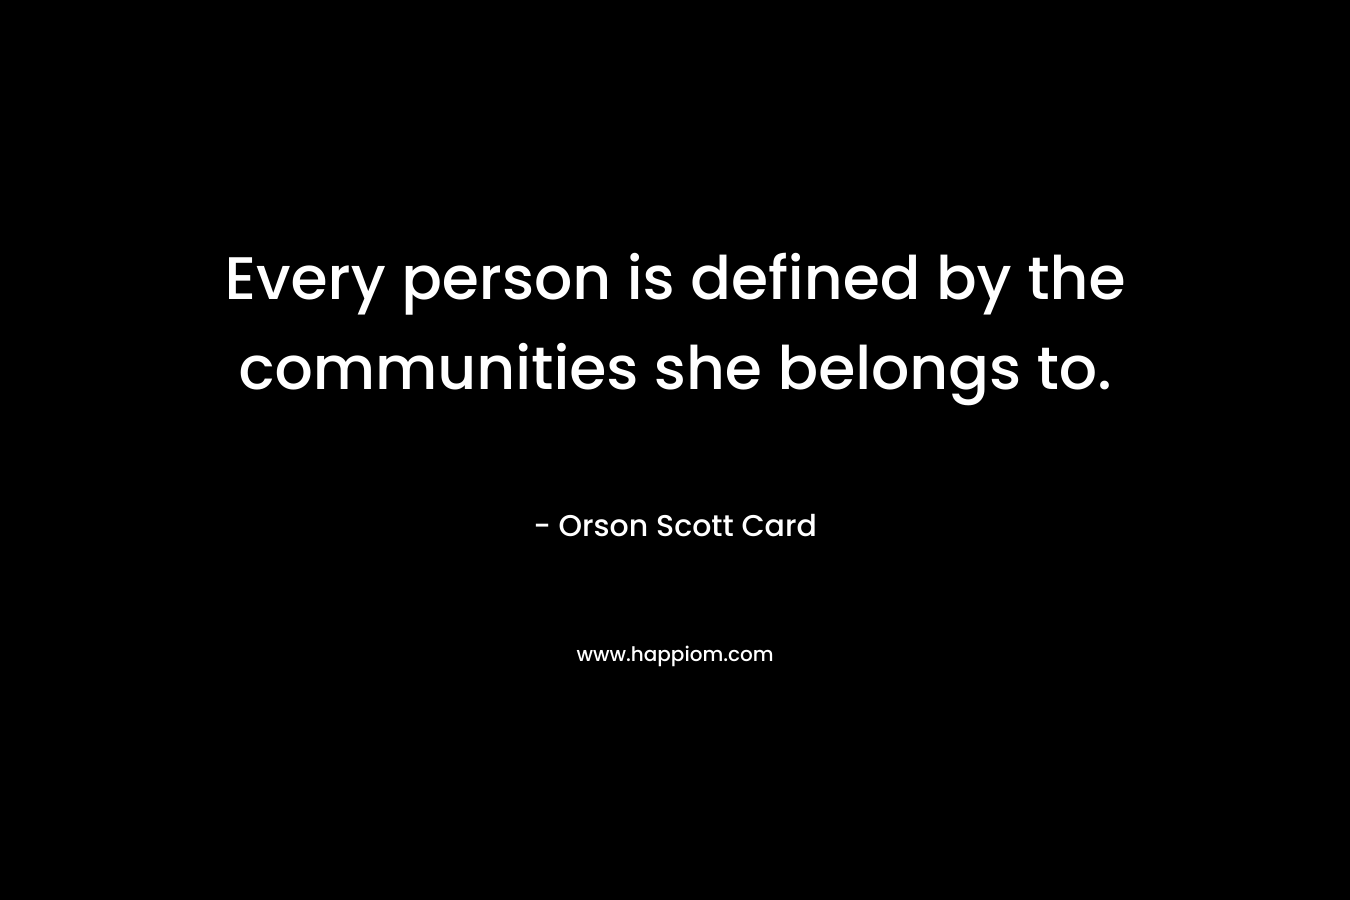 Every person is defined by the communities she belongs to. – Orson Scott Card